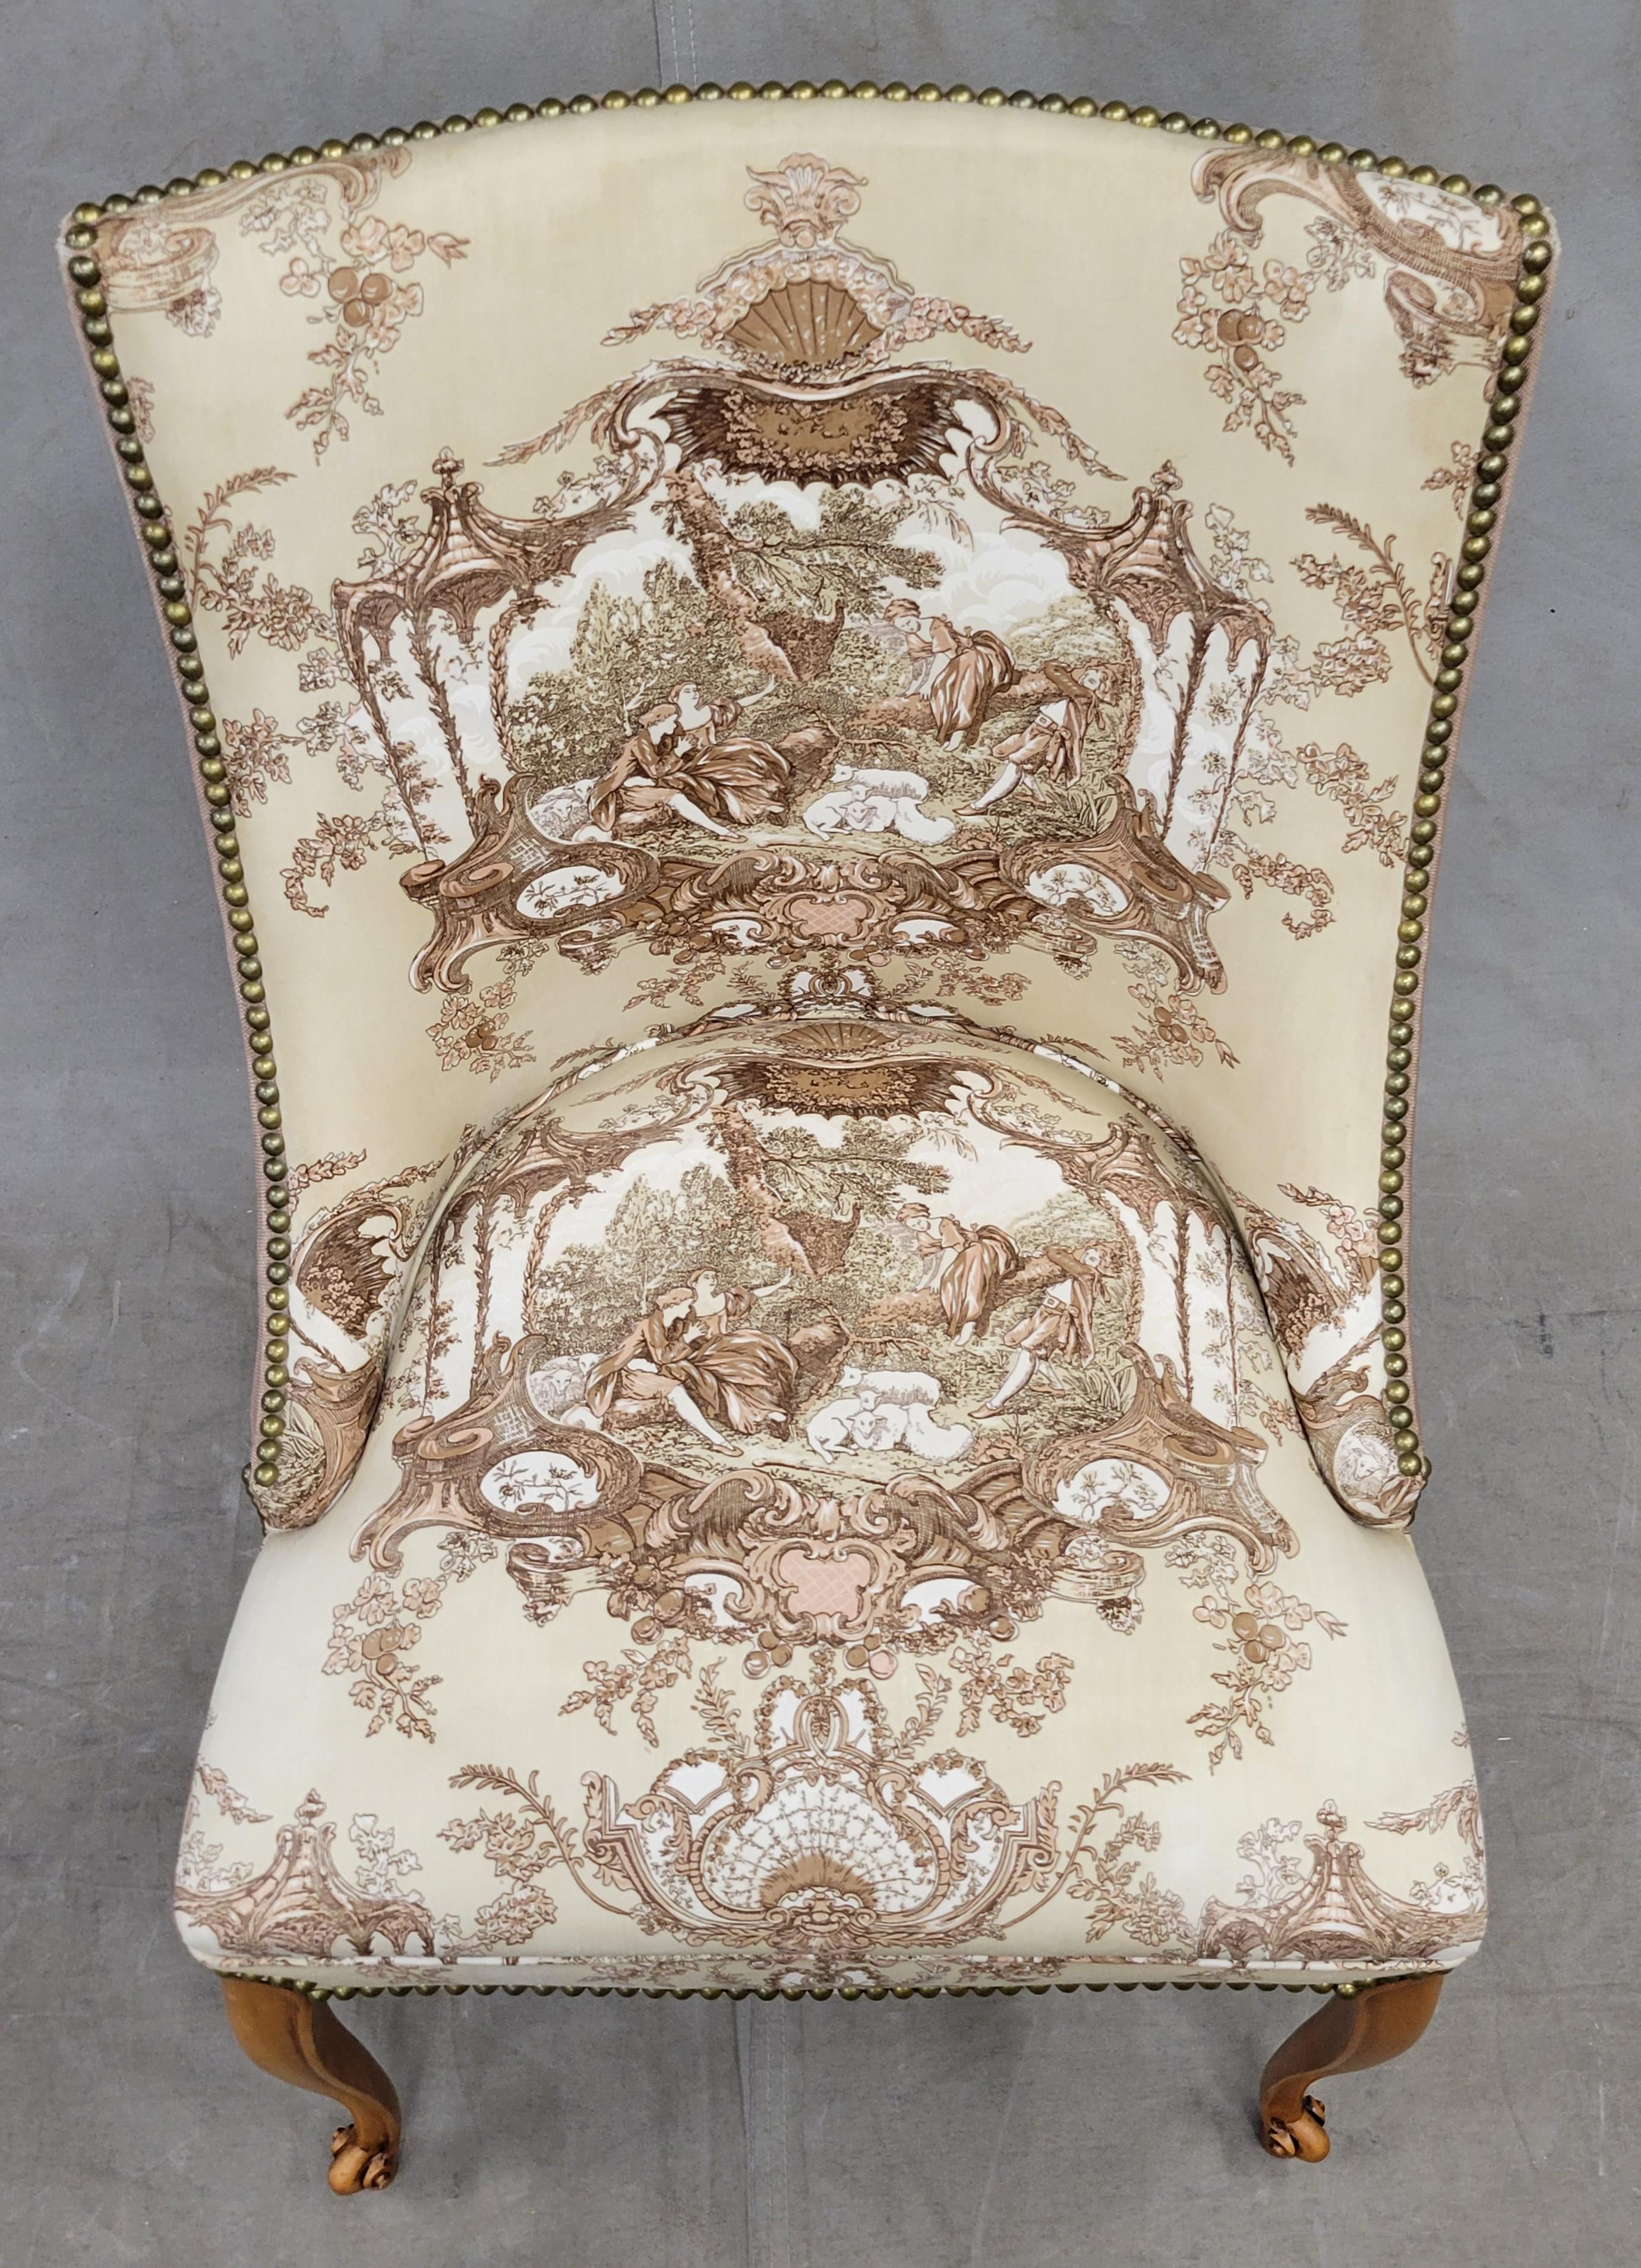 Cotton Vintage French Slipper Chairs with Toile Upholstery, a Pair